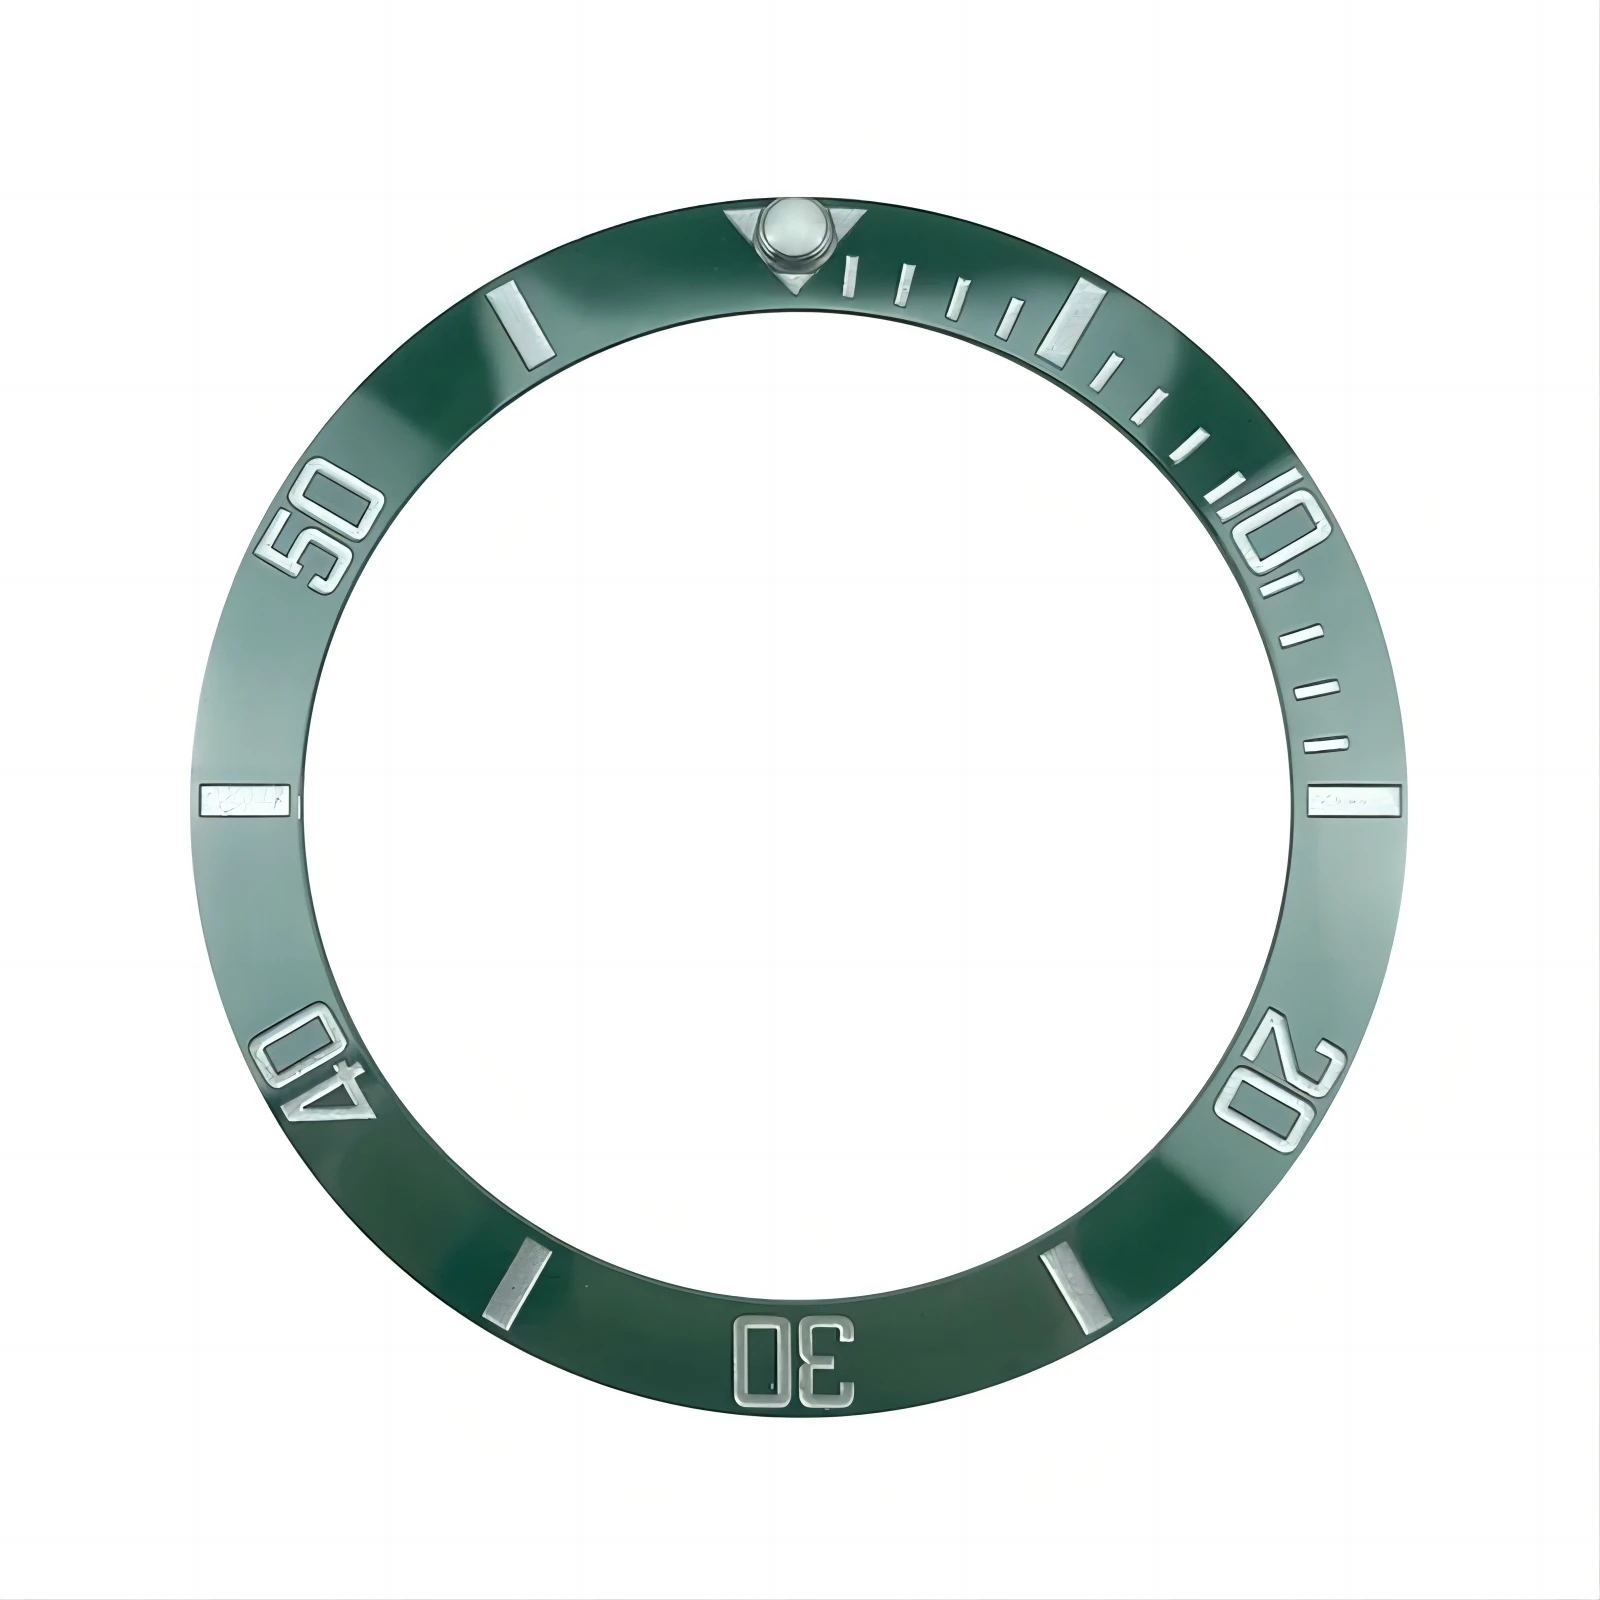 

New HOT 38mm High Quality Green fashion Ceramic Bezel Insert For Sub Divers Men's Watches Replace Accessories The dial parts